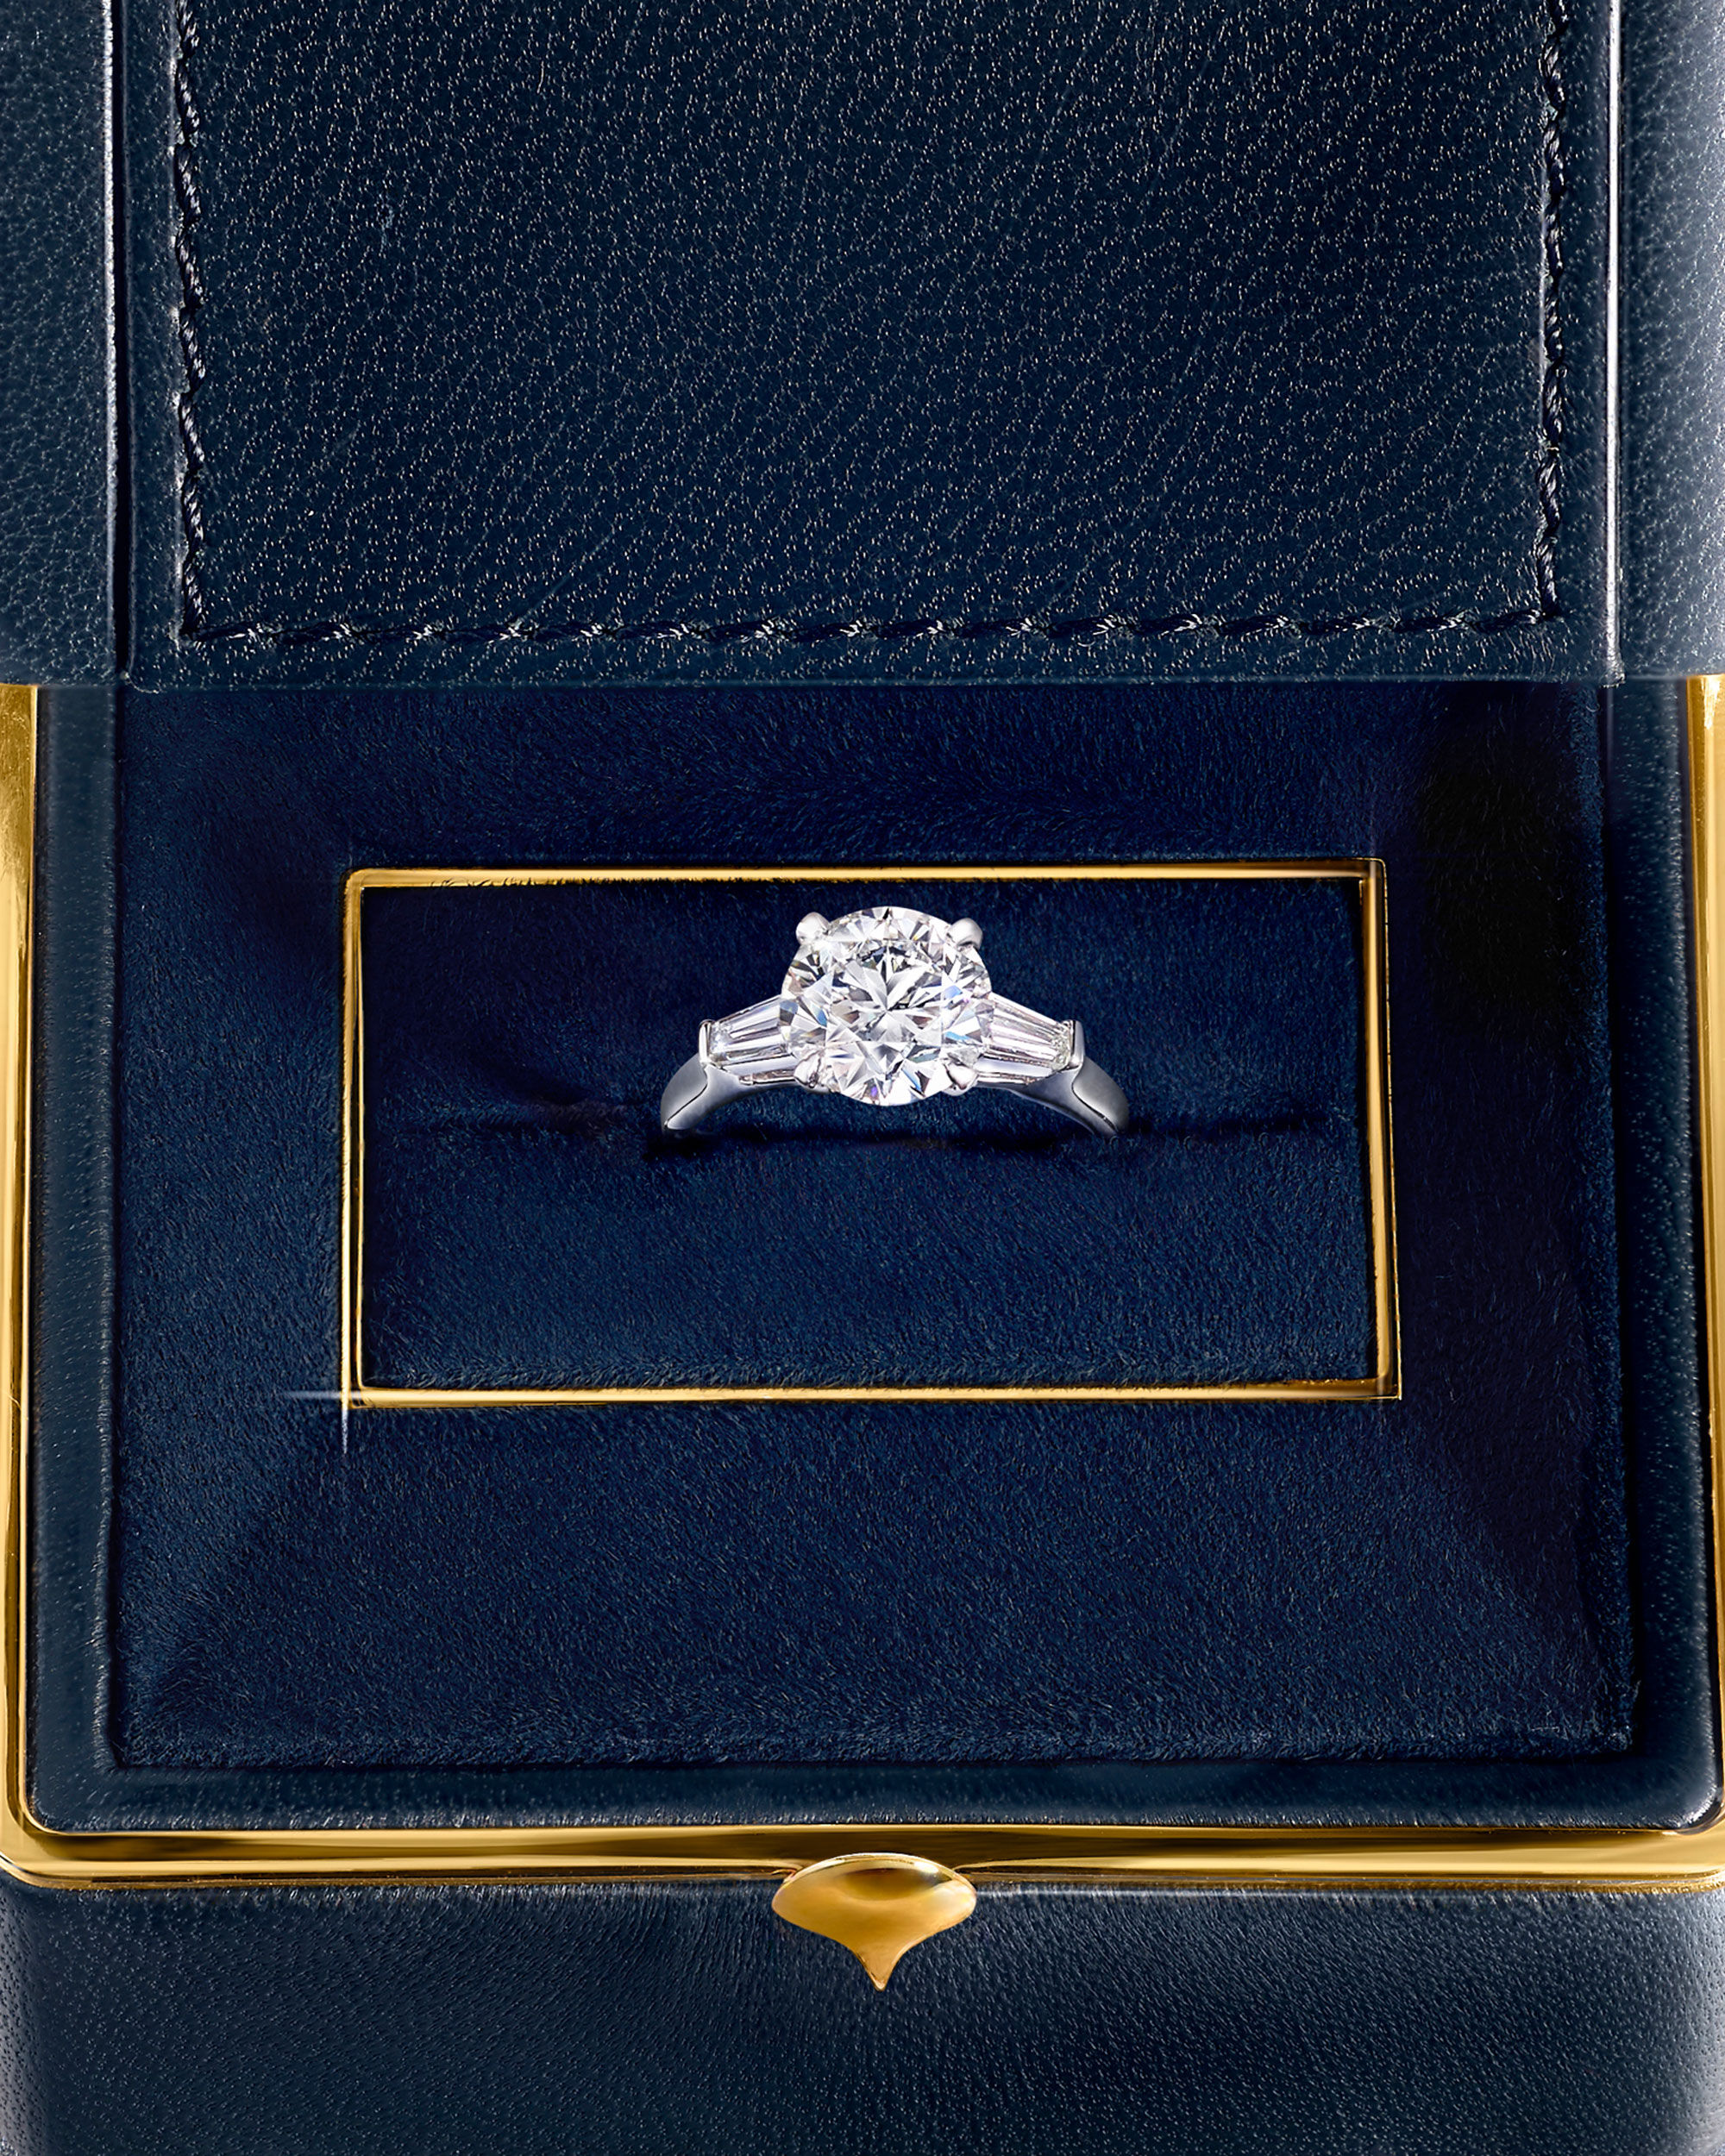 Close up of a Graff diamond engagement ring in a jewellery box